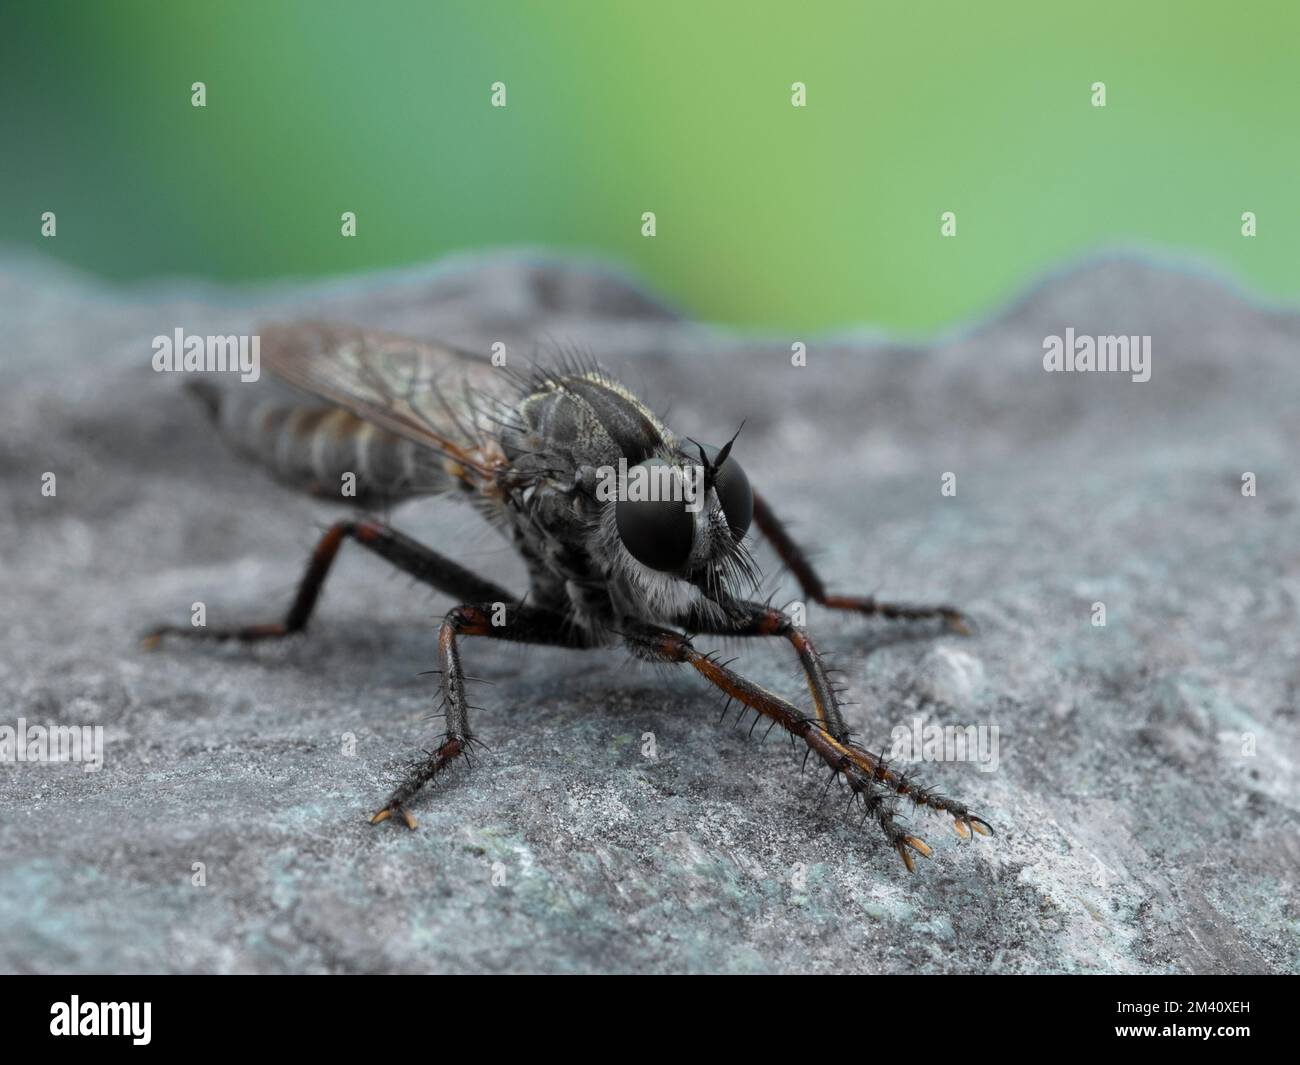 Front view of a female robber fly, Machimus callidus, rubbing its front legs together to clean them Stock Photo